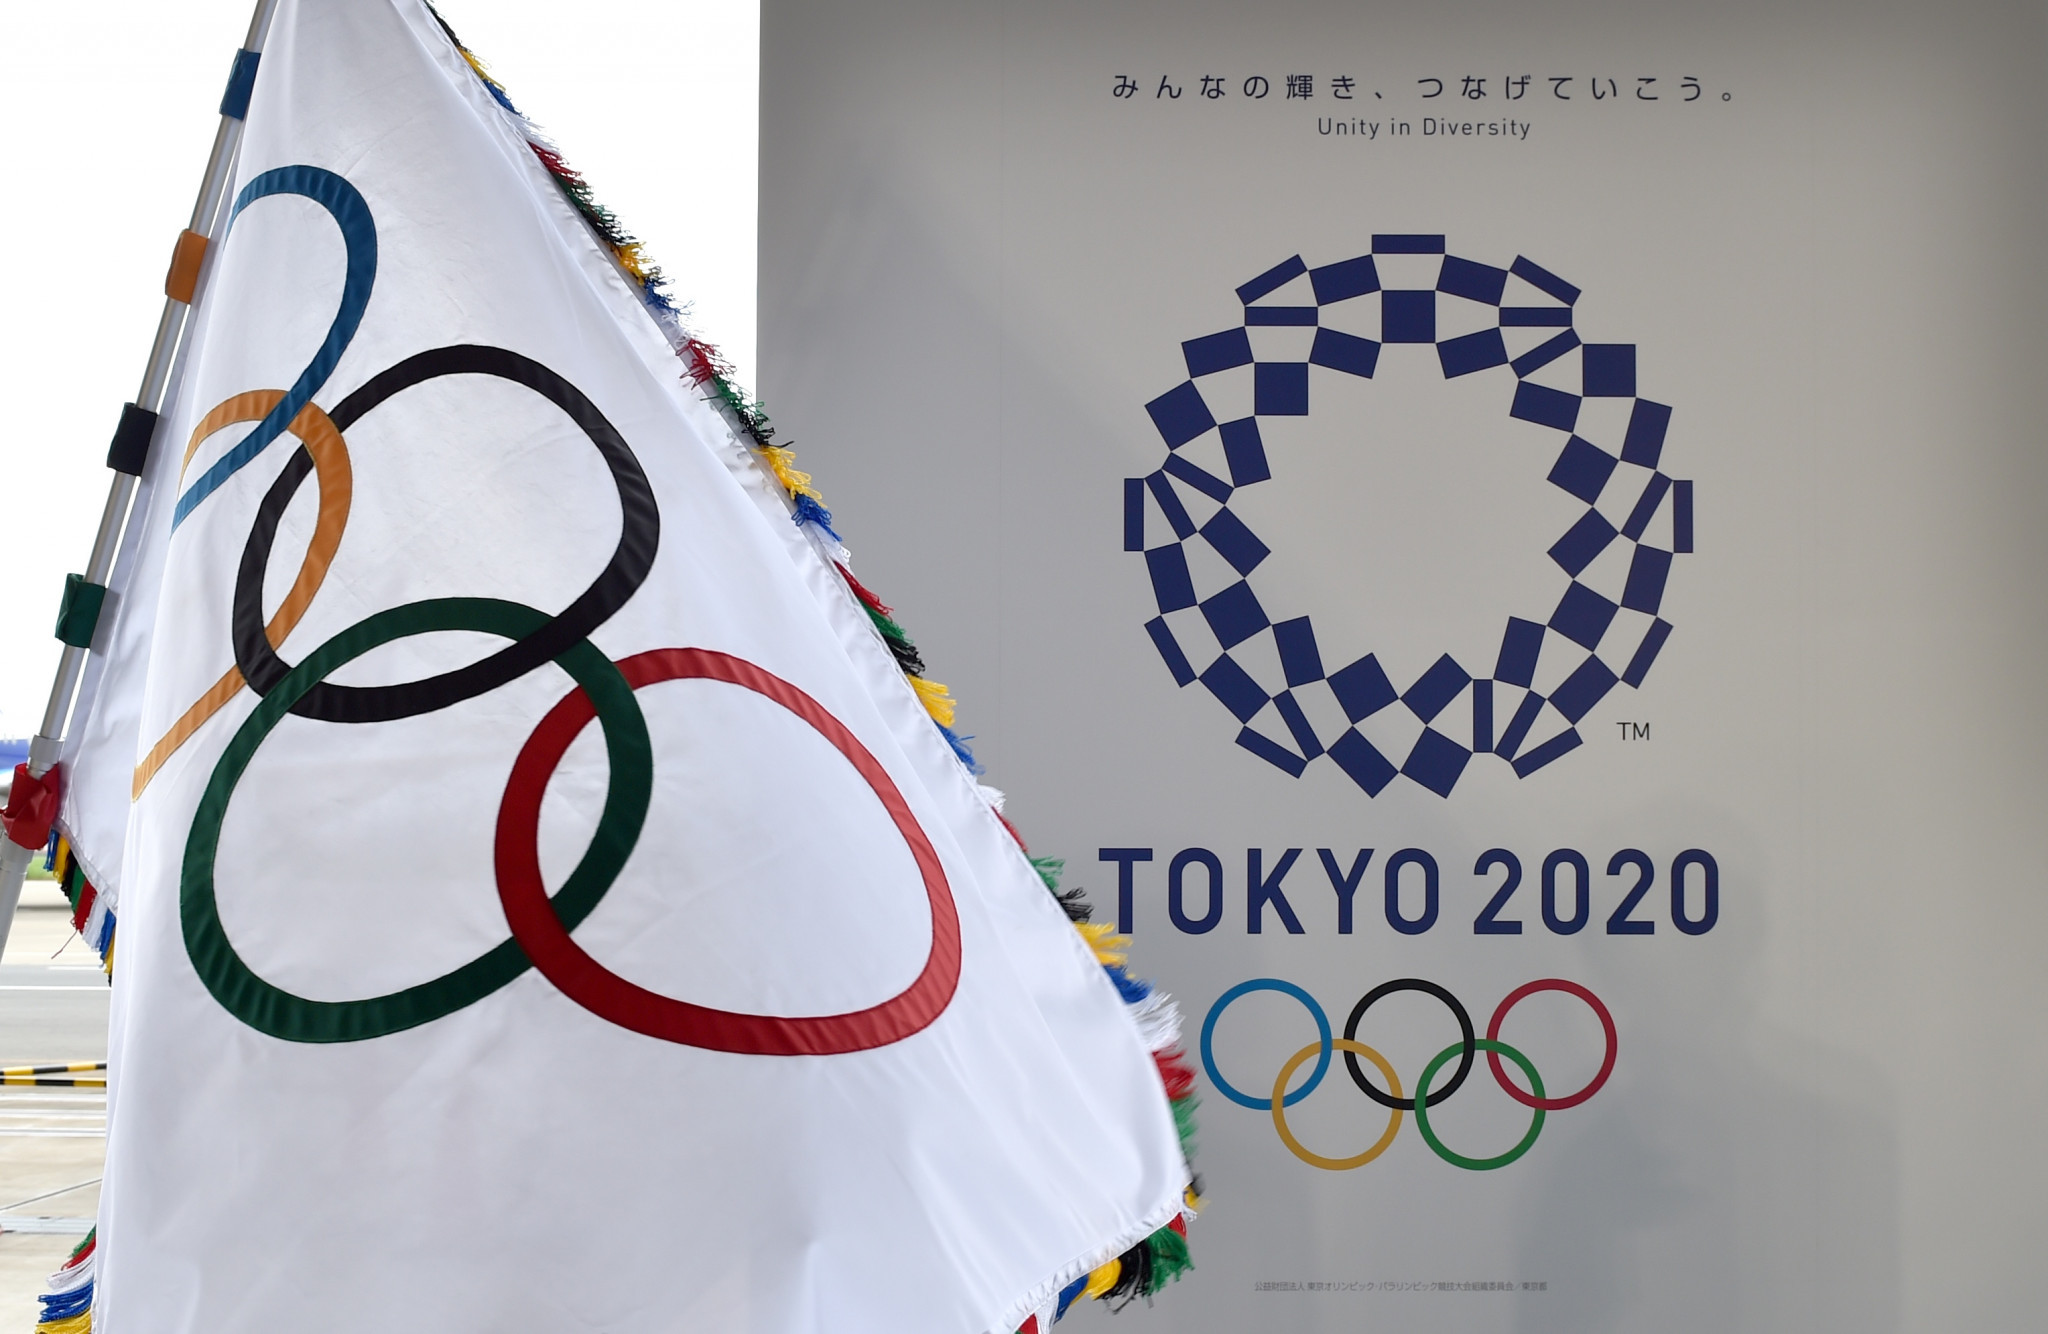 Free cabled internet and Wi-Fi access will be available to all journalists in all venues at Tokyo 2020, marking a first for an Olympic Games ©Getty Images